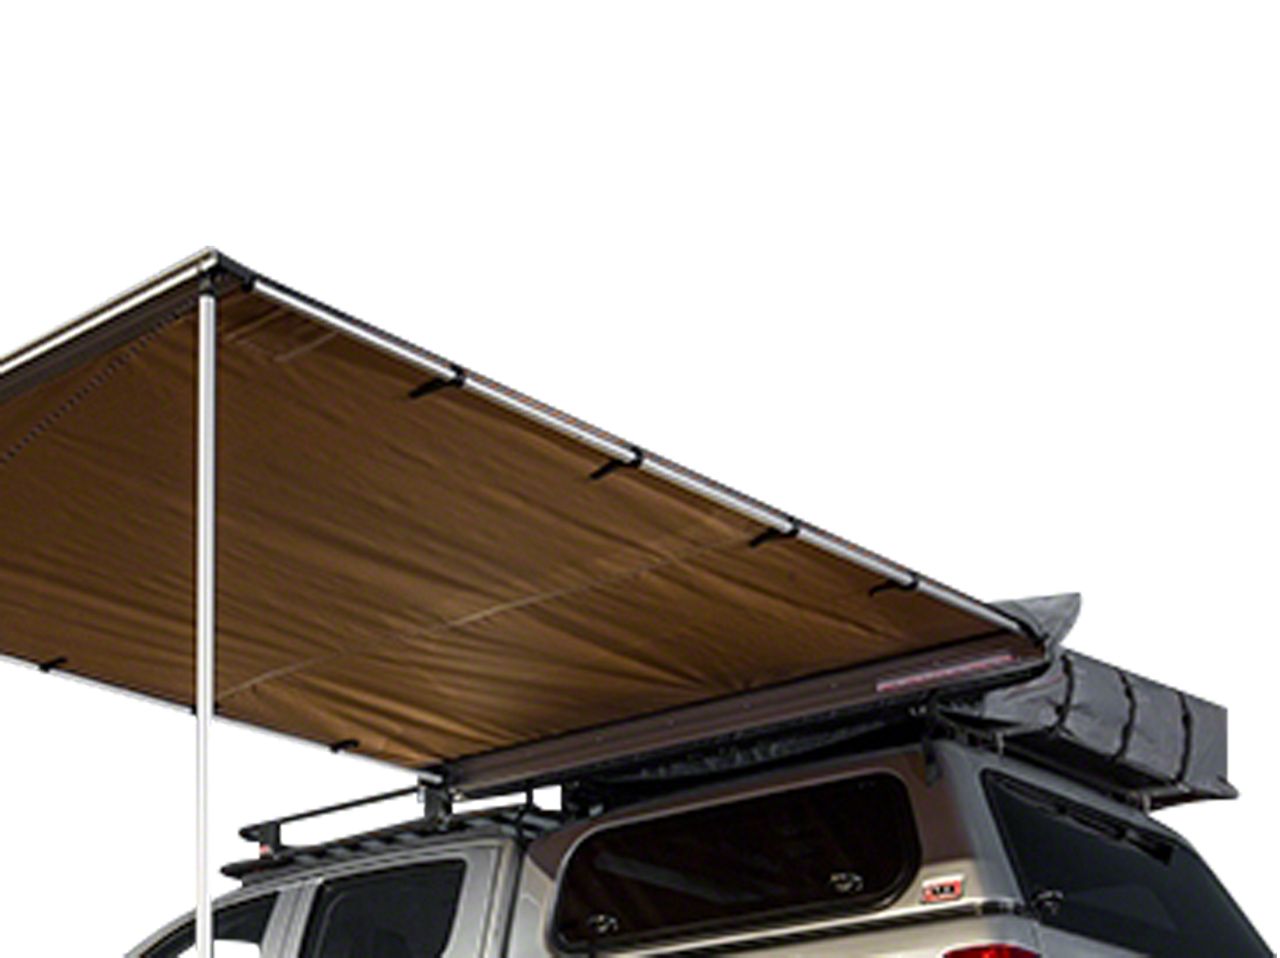 Ram 1500 Roof Top Tents & Camping Gear 2009-2018